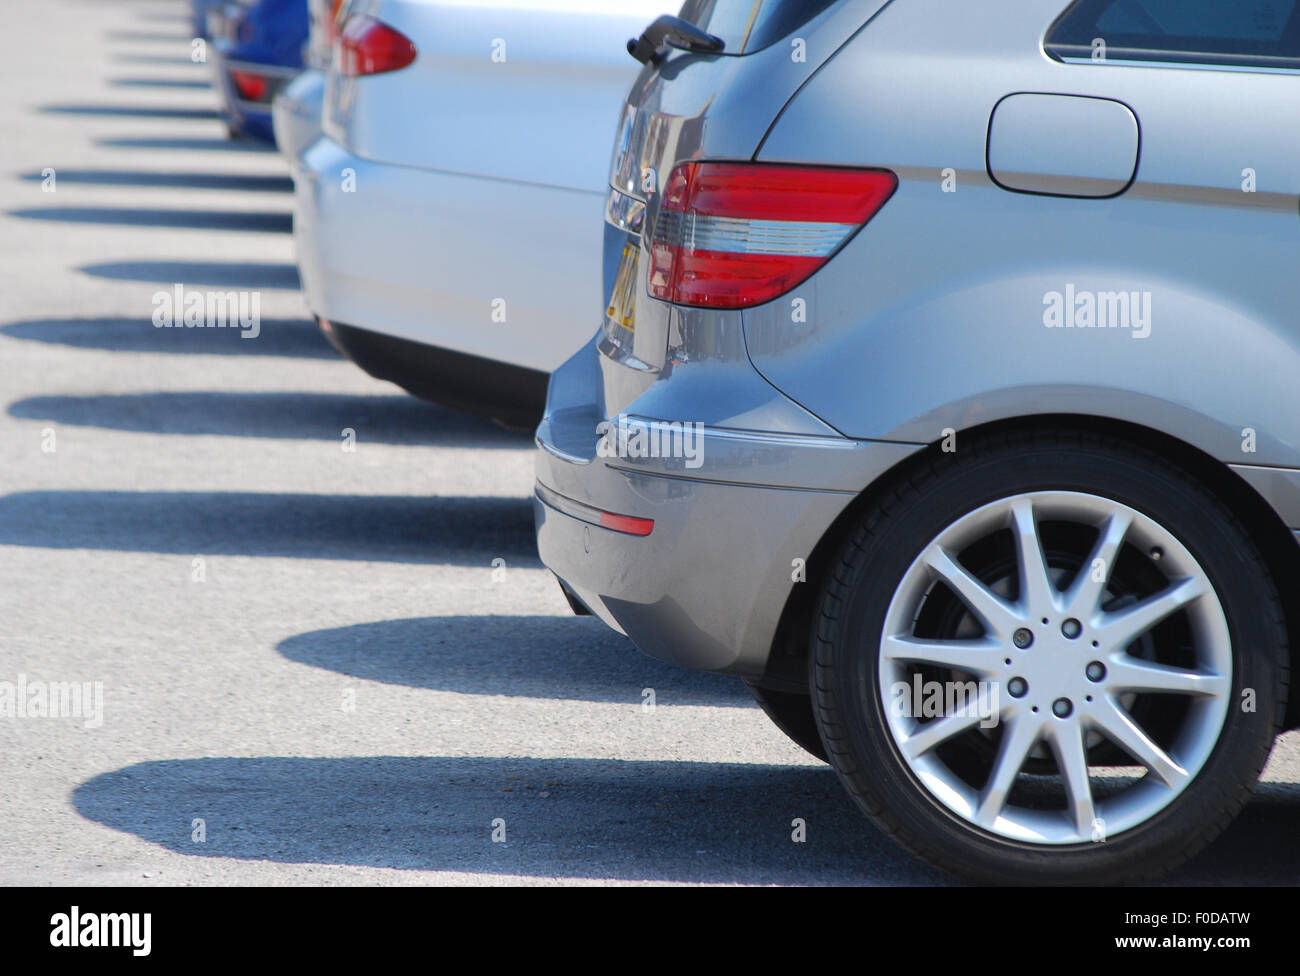 Telephoto view of row of parked cars Stock Photo